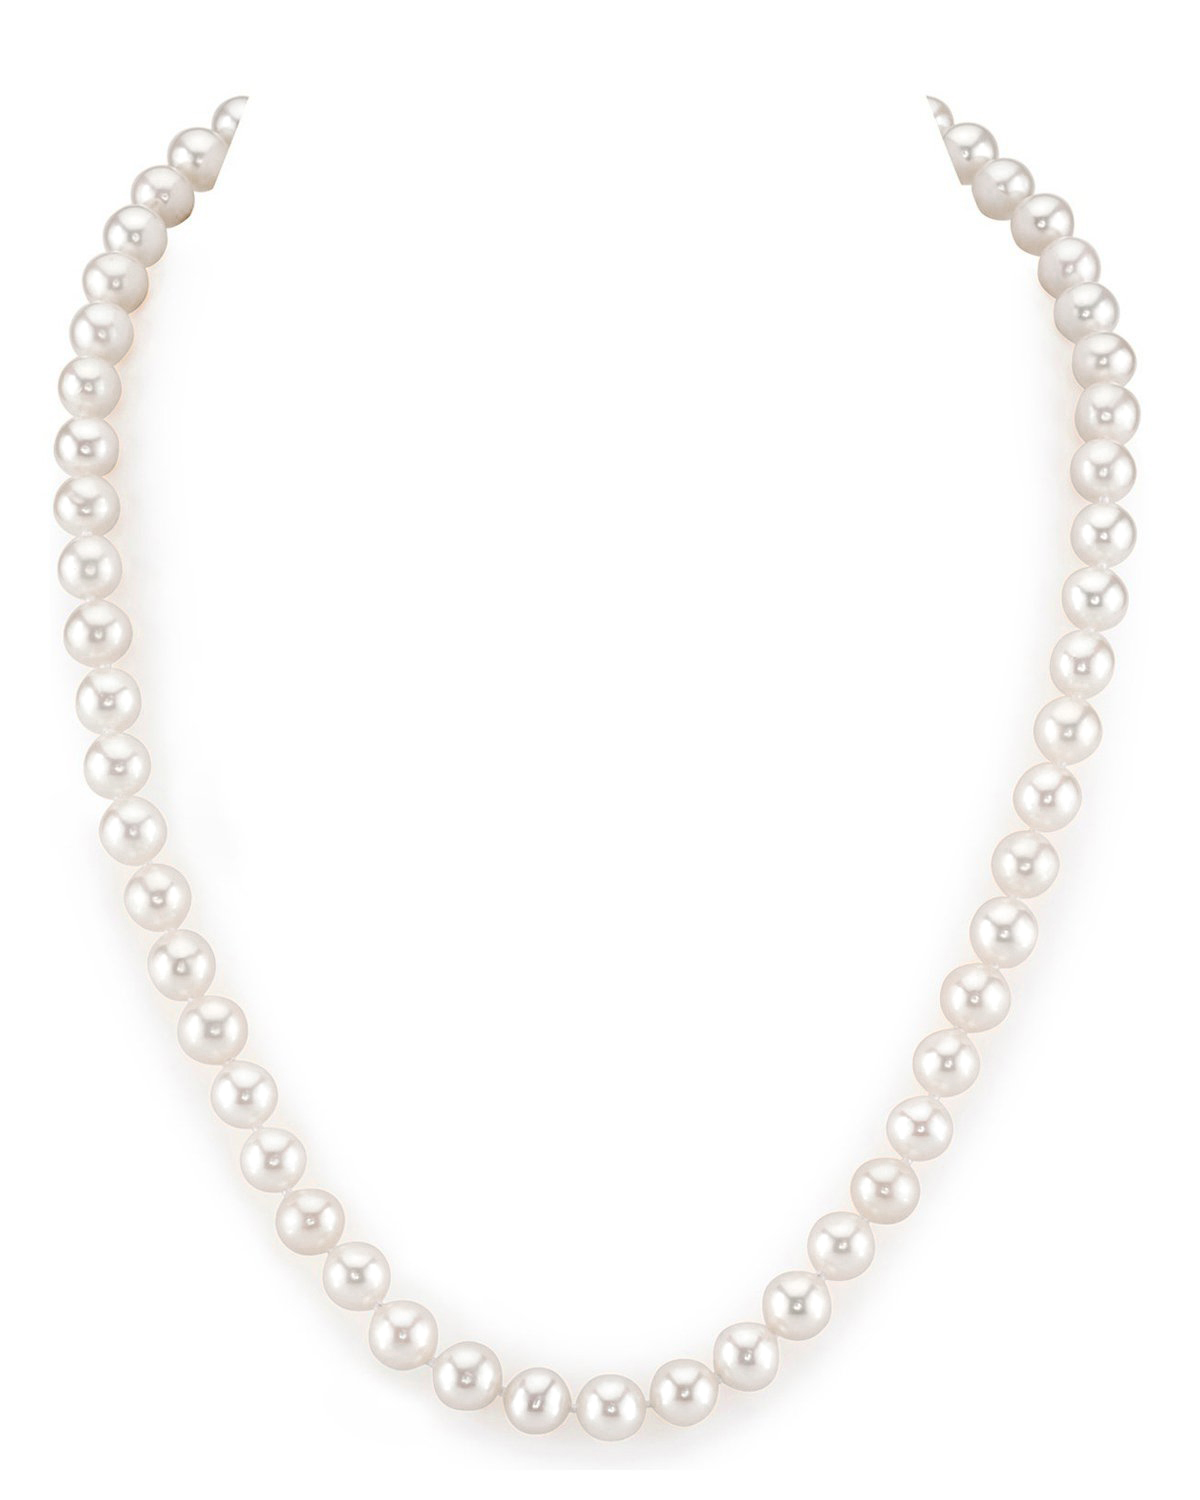 100" LONG 7-8MM WHITE FRESHWATER PEARL NECKLACE 